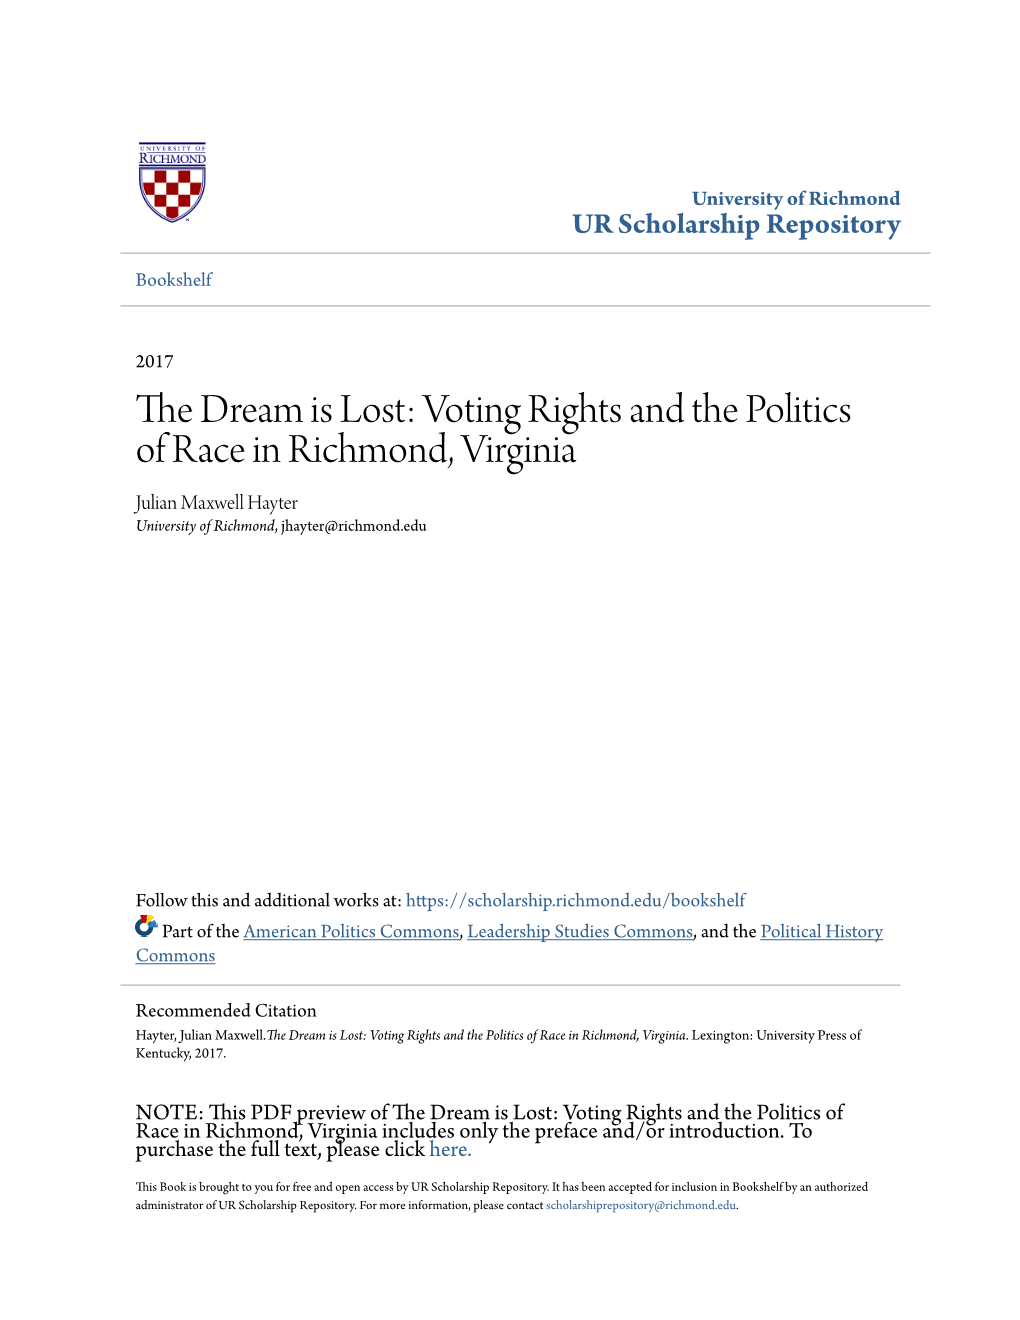 Voting Rights and the Politics of Race in Richmond, Virginia Julian Maxwell Hayter University of Richmond, Jhayter@Richmond.Edu